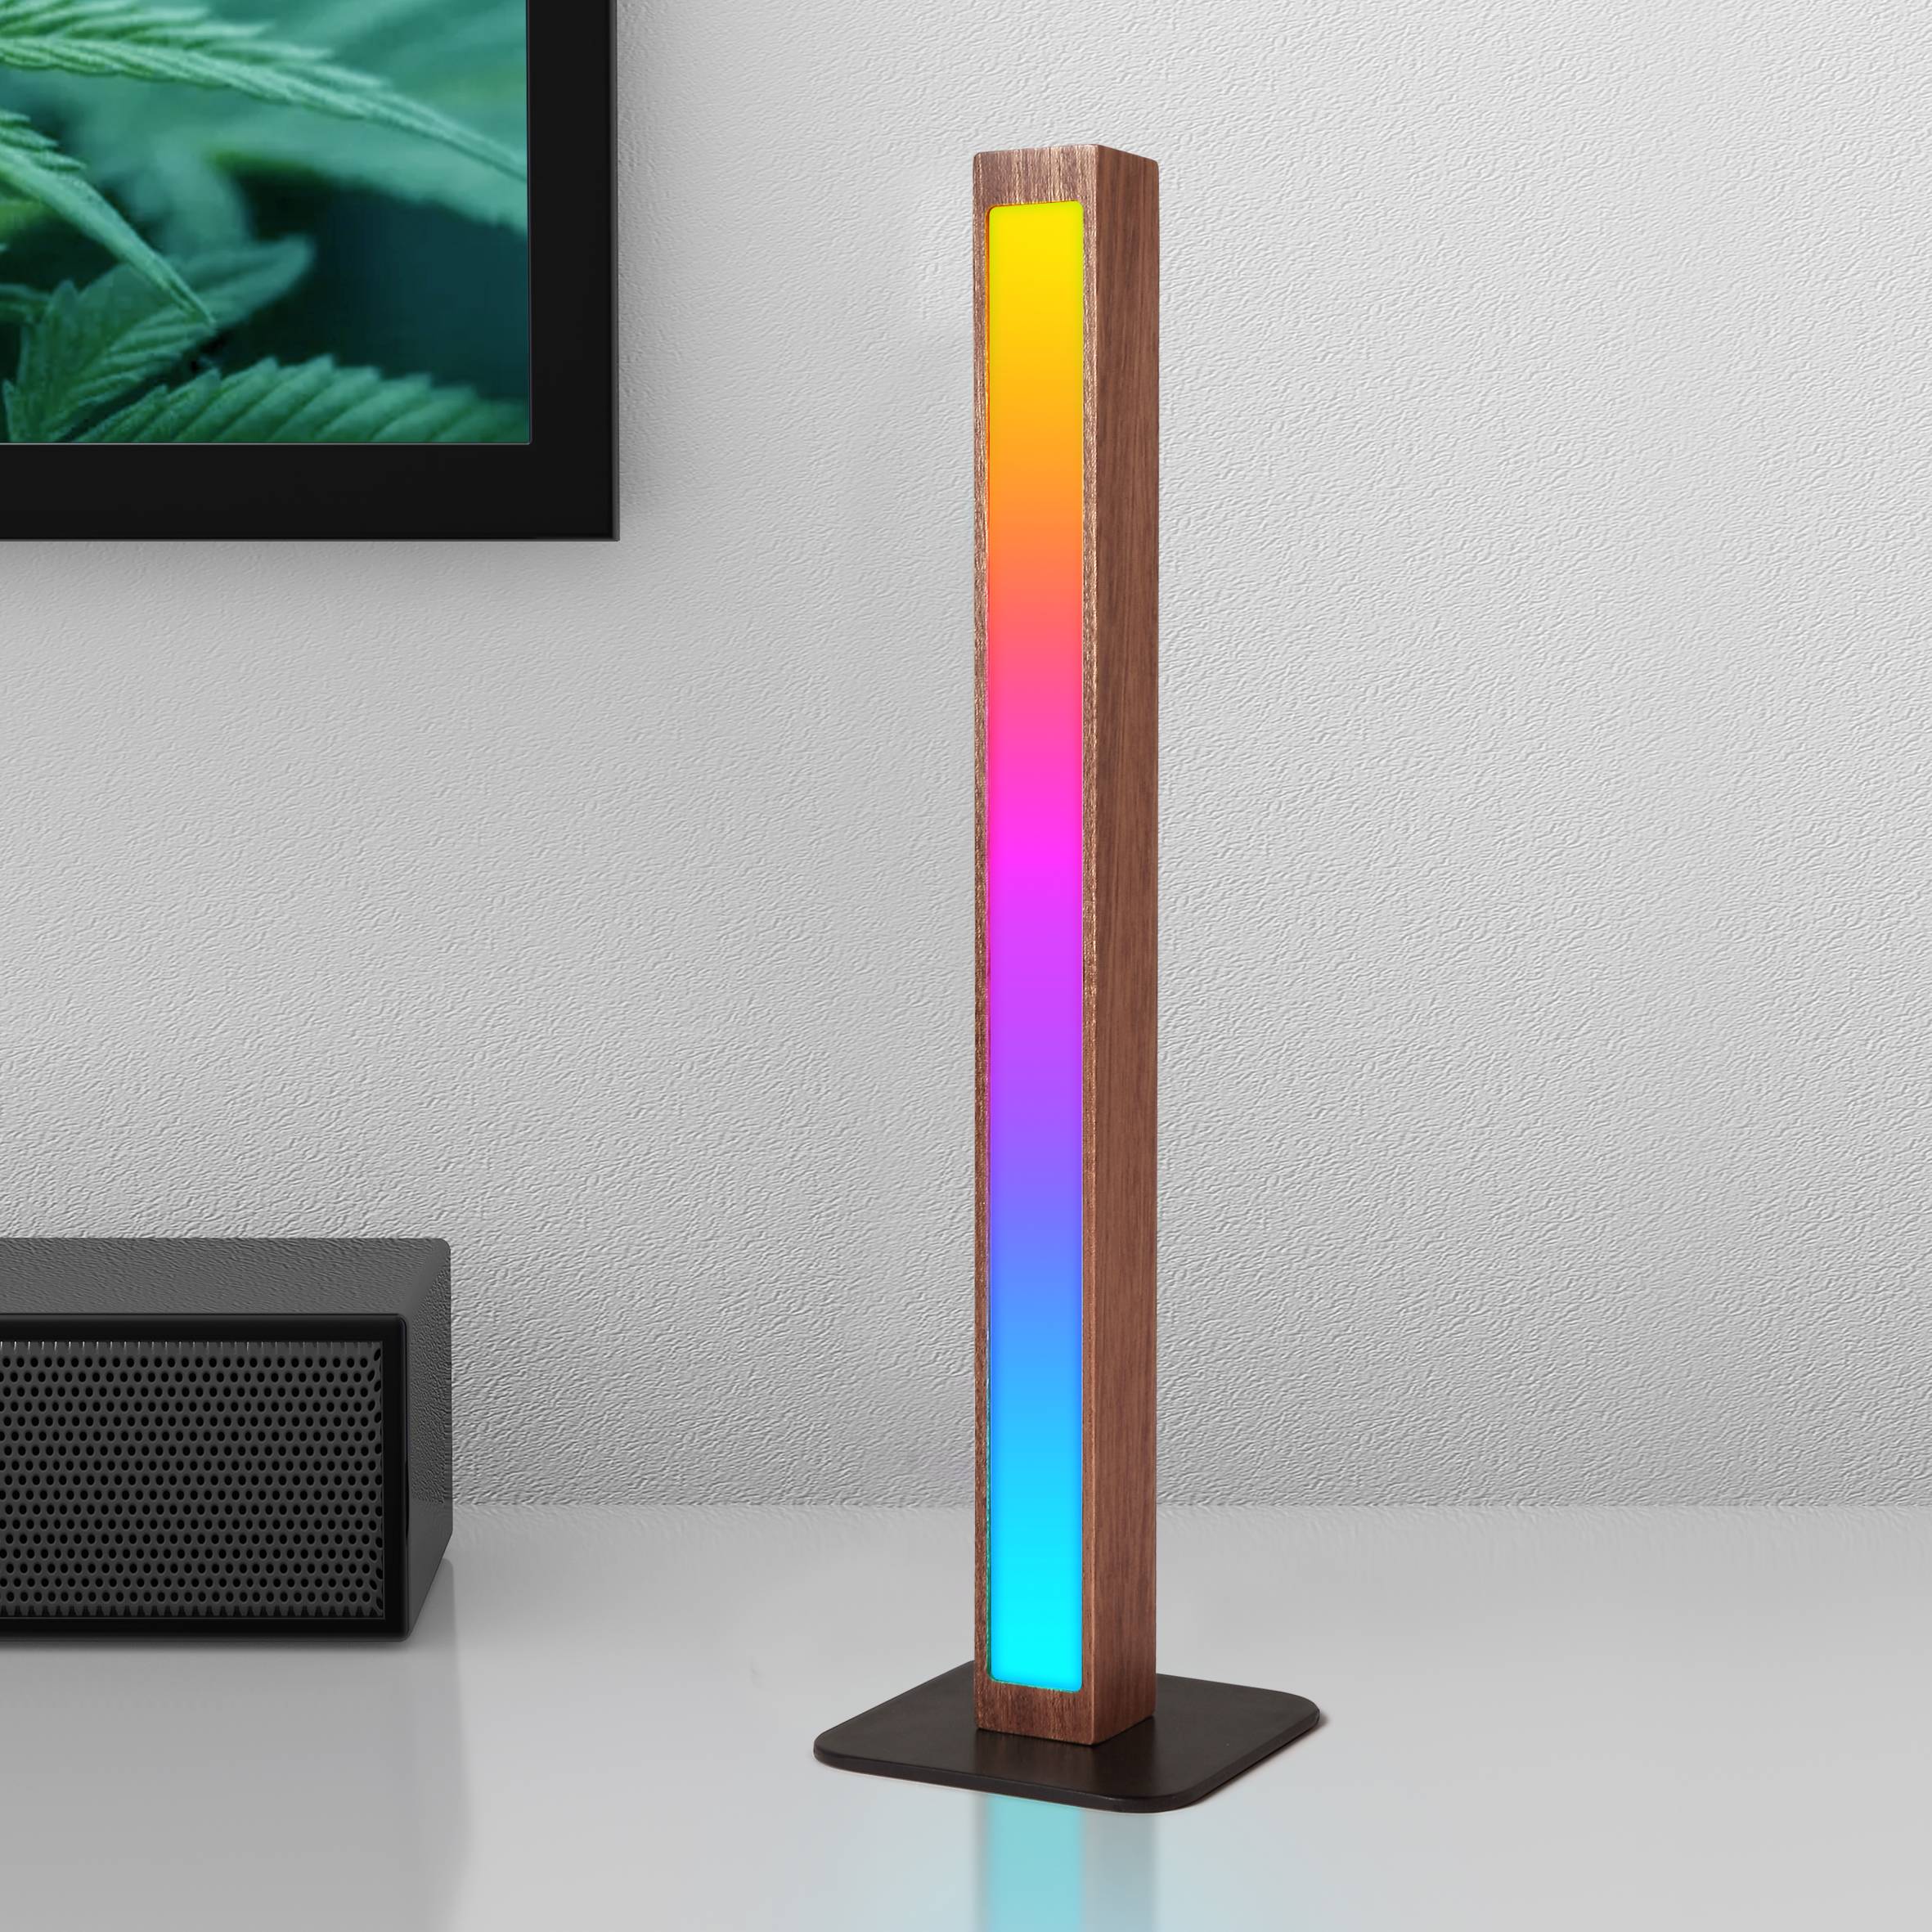 Hot sale Wooden Magnetic Pickup Rhythm Table Light USB Charge Ambient Light for TV or Game Room